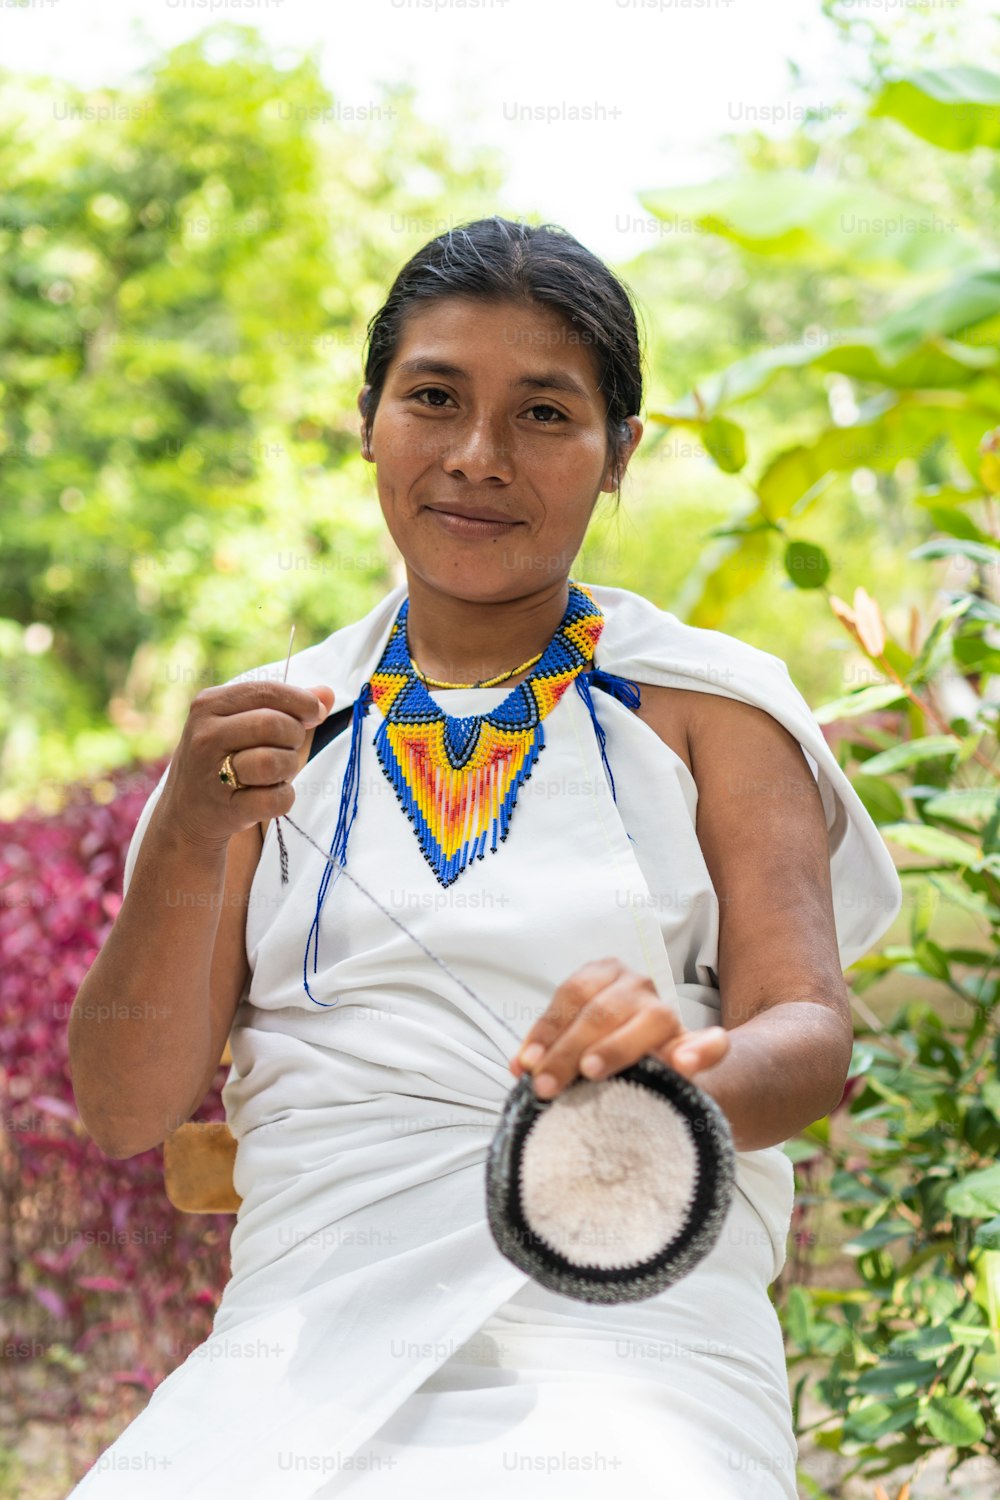 Indigenous woman from the Sierra Nevada de Santa Marta in traditional clothing weaving looking at the camera.